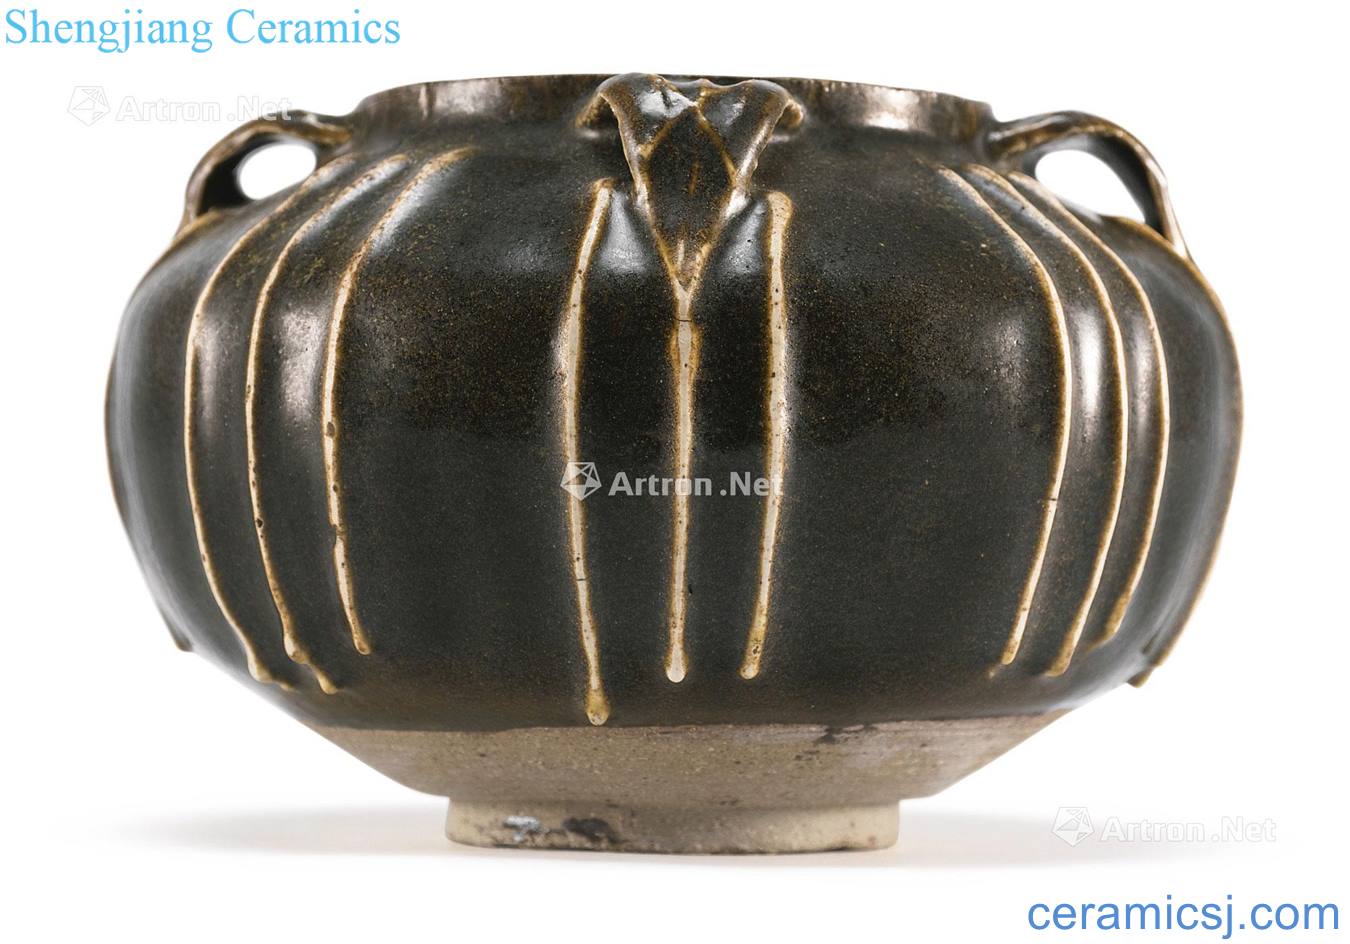 Northern song dynasty/gold The black glaze ridge lines of quaternary cans